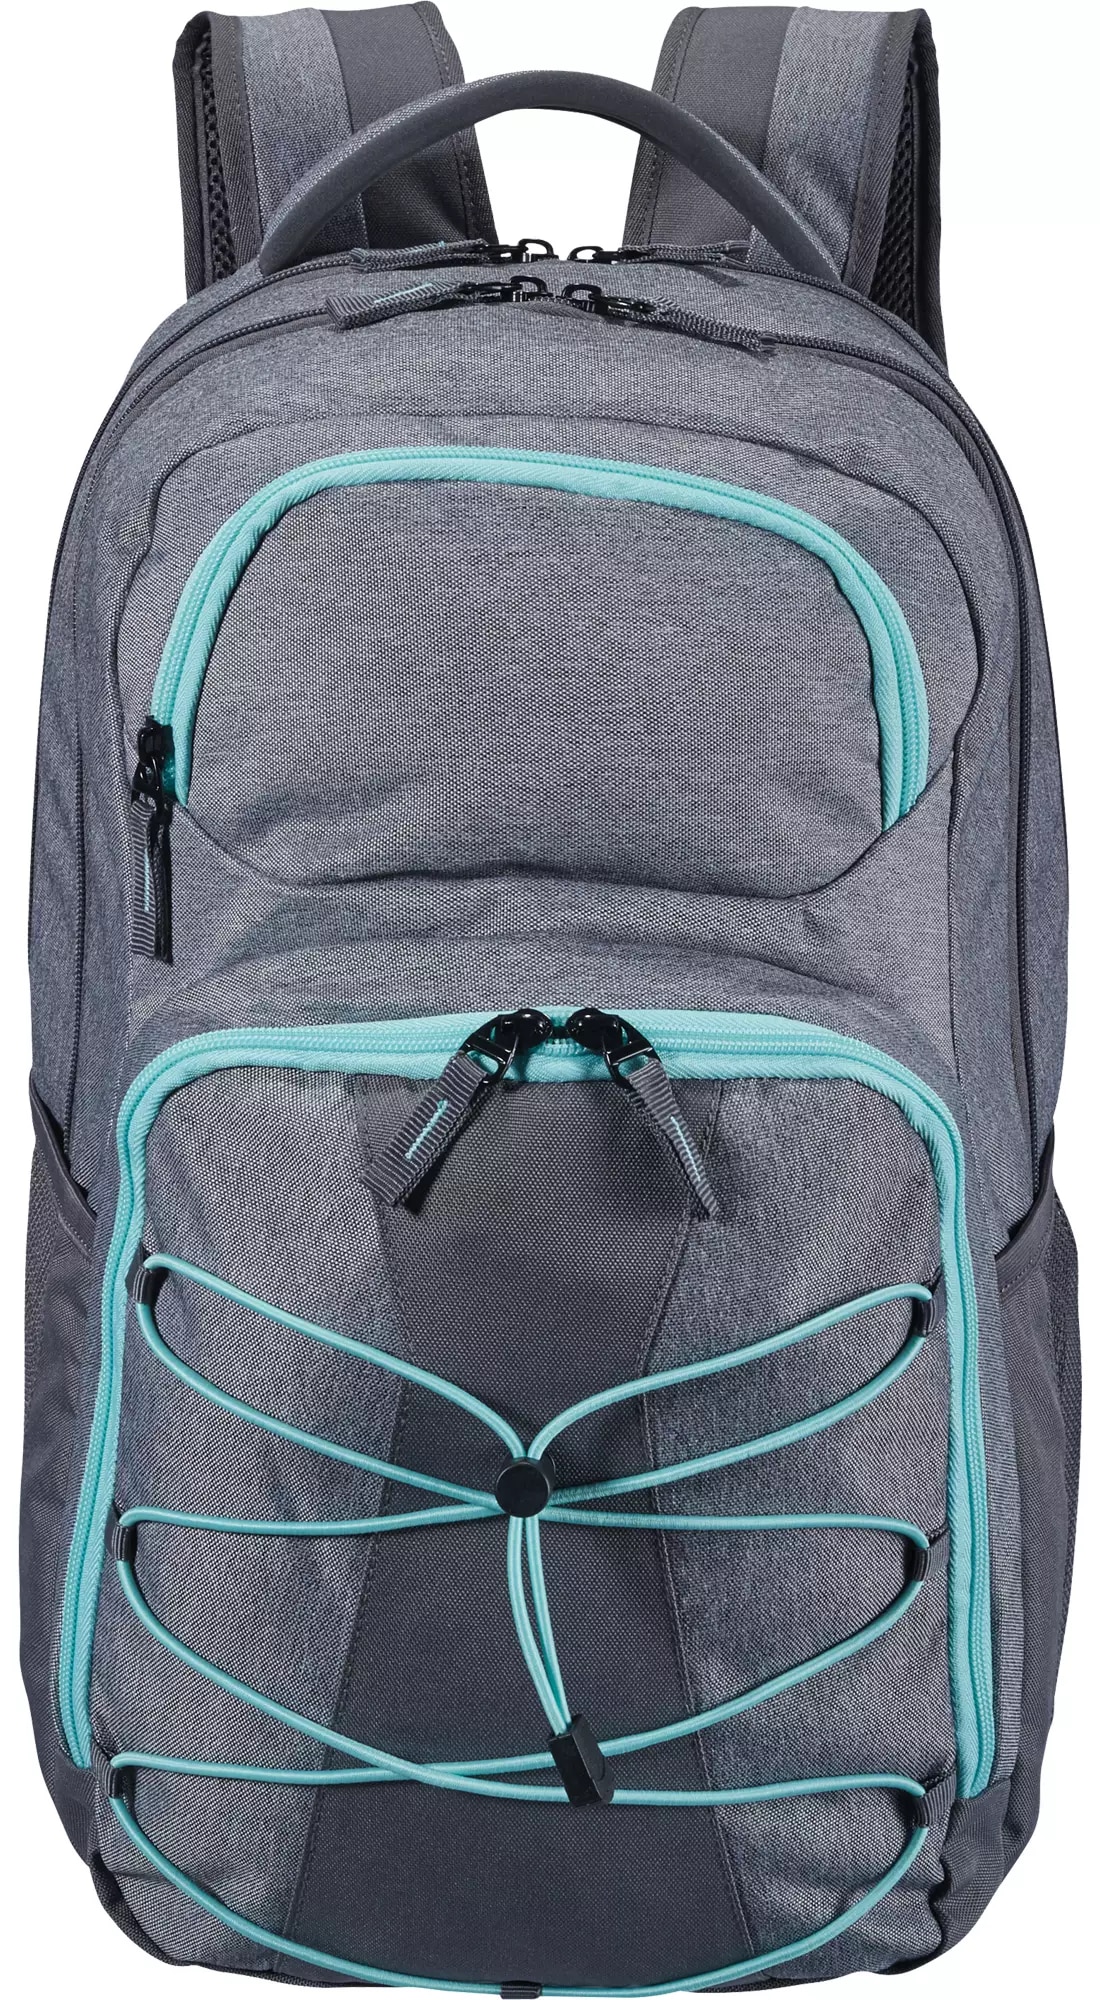 DSG Backpack Sale: Blazer $9.97, Voyager $9.99 and More + Free Shipping on orders $49+